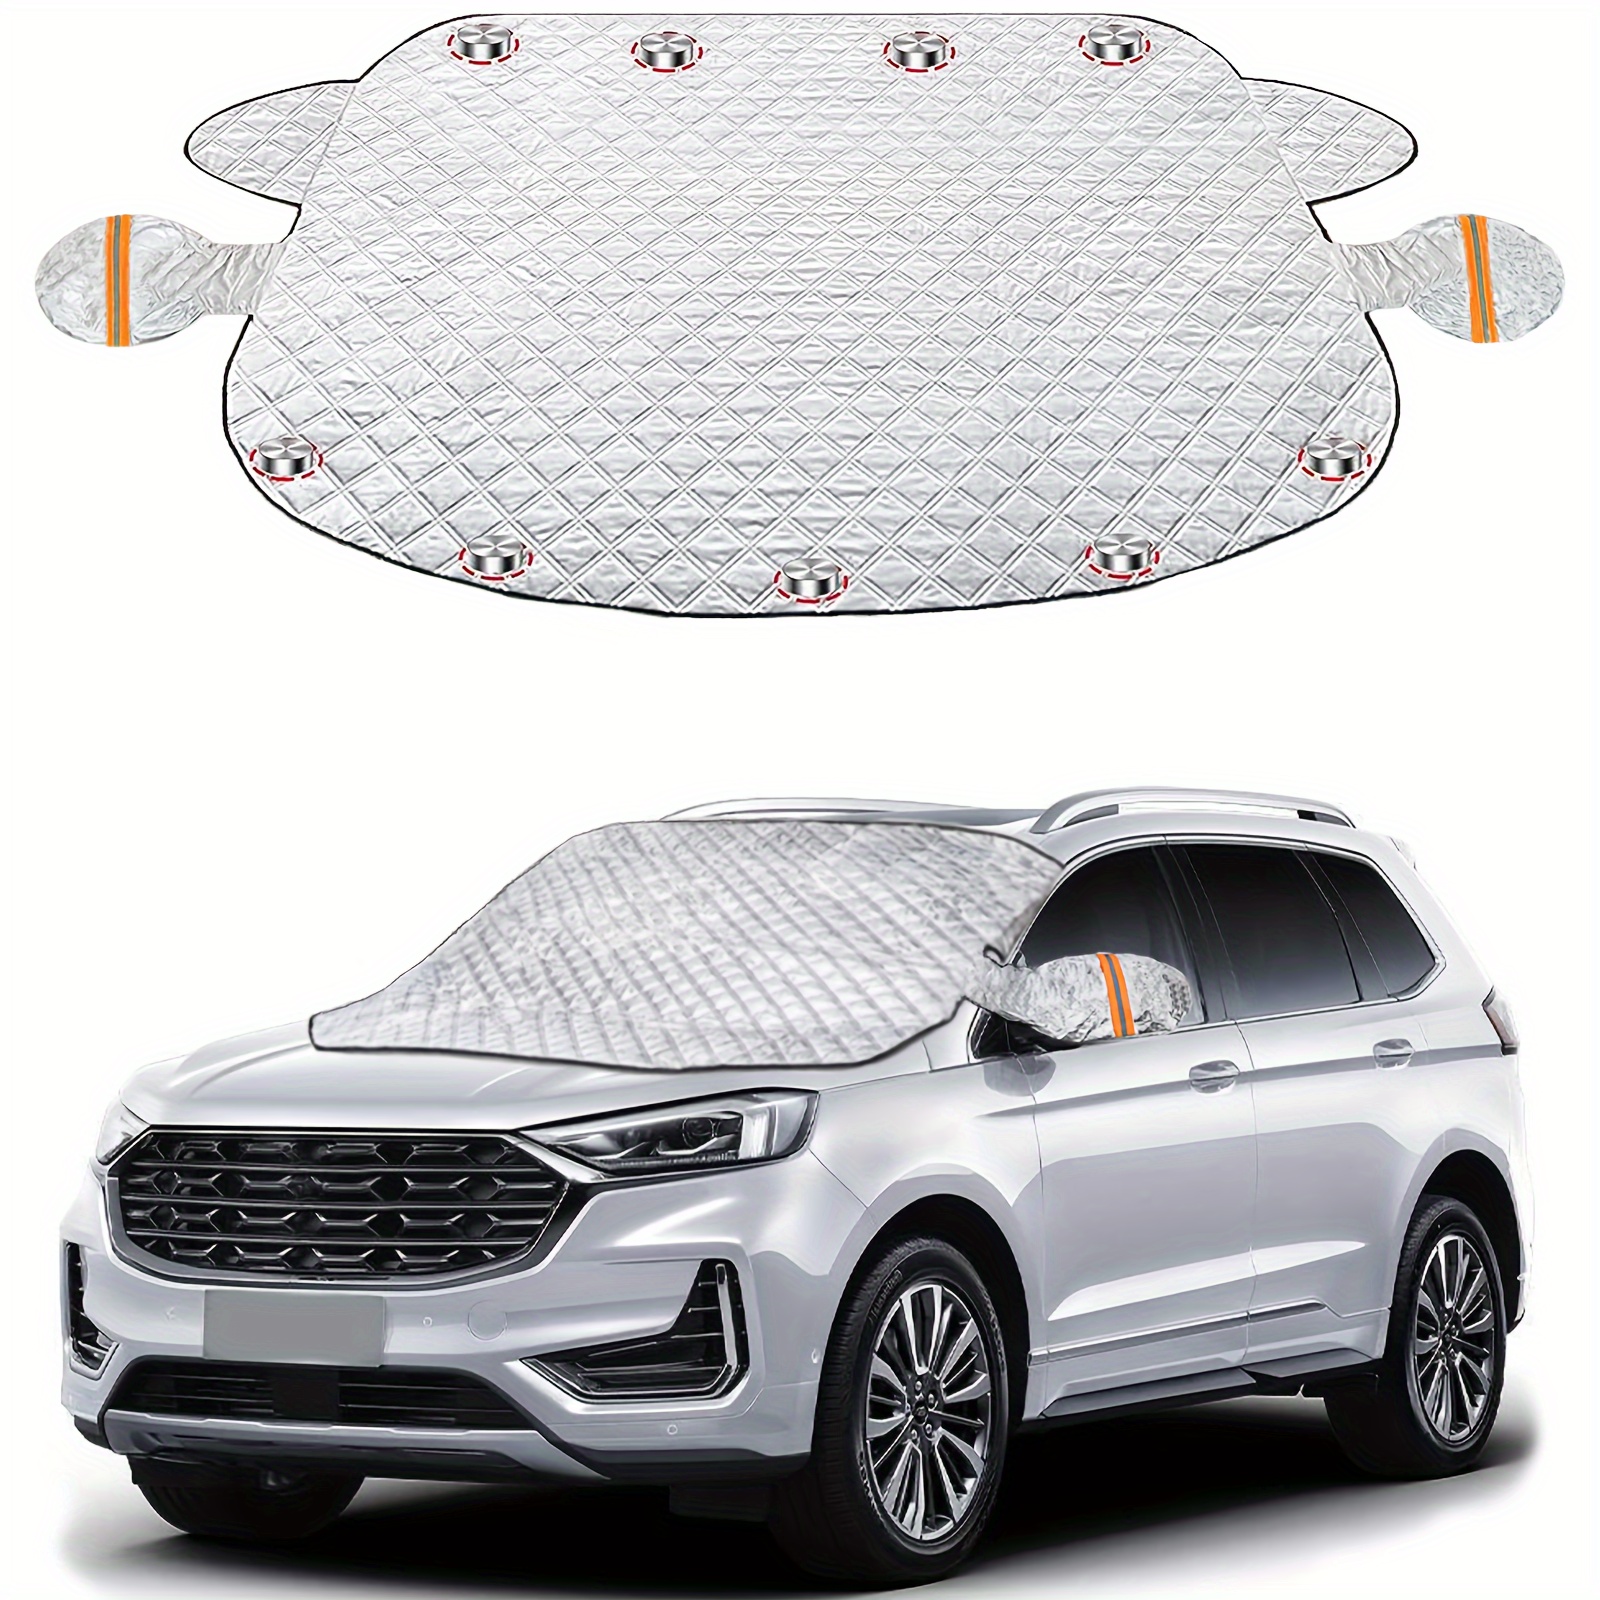 Car Windshield Cover, Thick Windscreen Covers Frost, Waterproof Car Front  Window Cover Protector Anti Snow Ice Frost Sun UV Dust for SUVs Cars